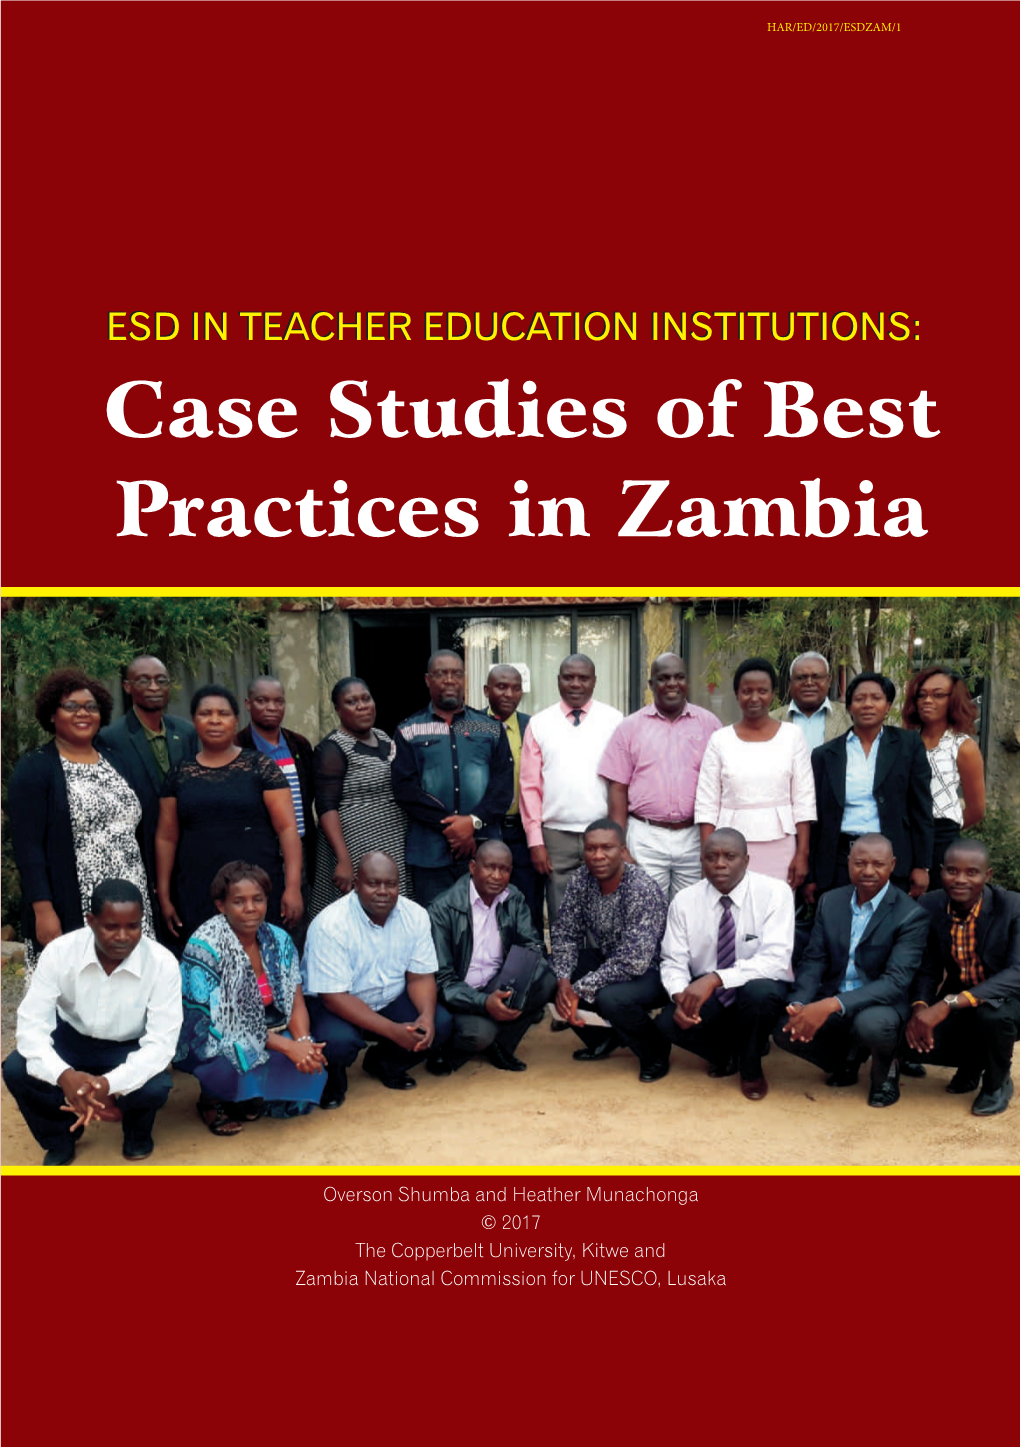 ESD in Teacher Education Institutions: Case Studies of Best Practices in Zambia; 2017